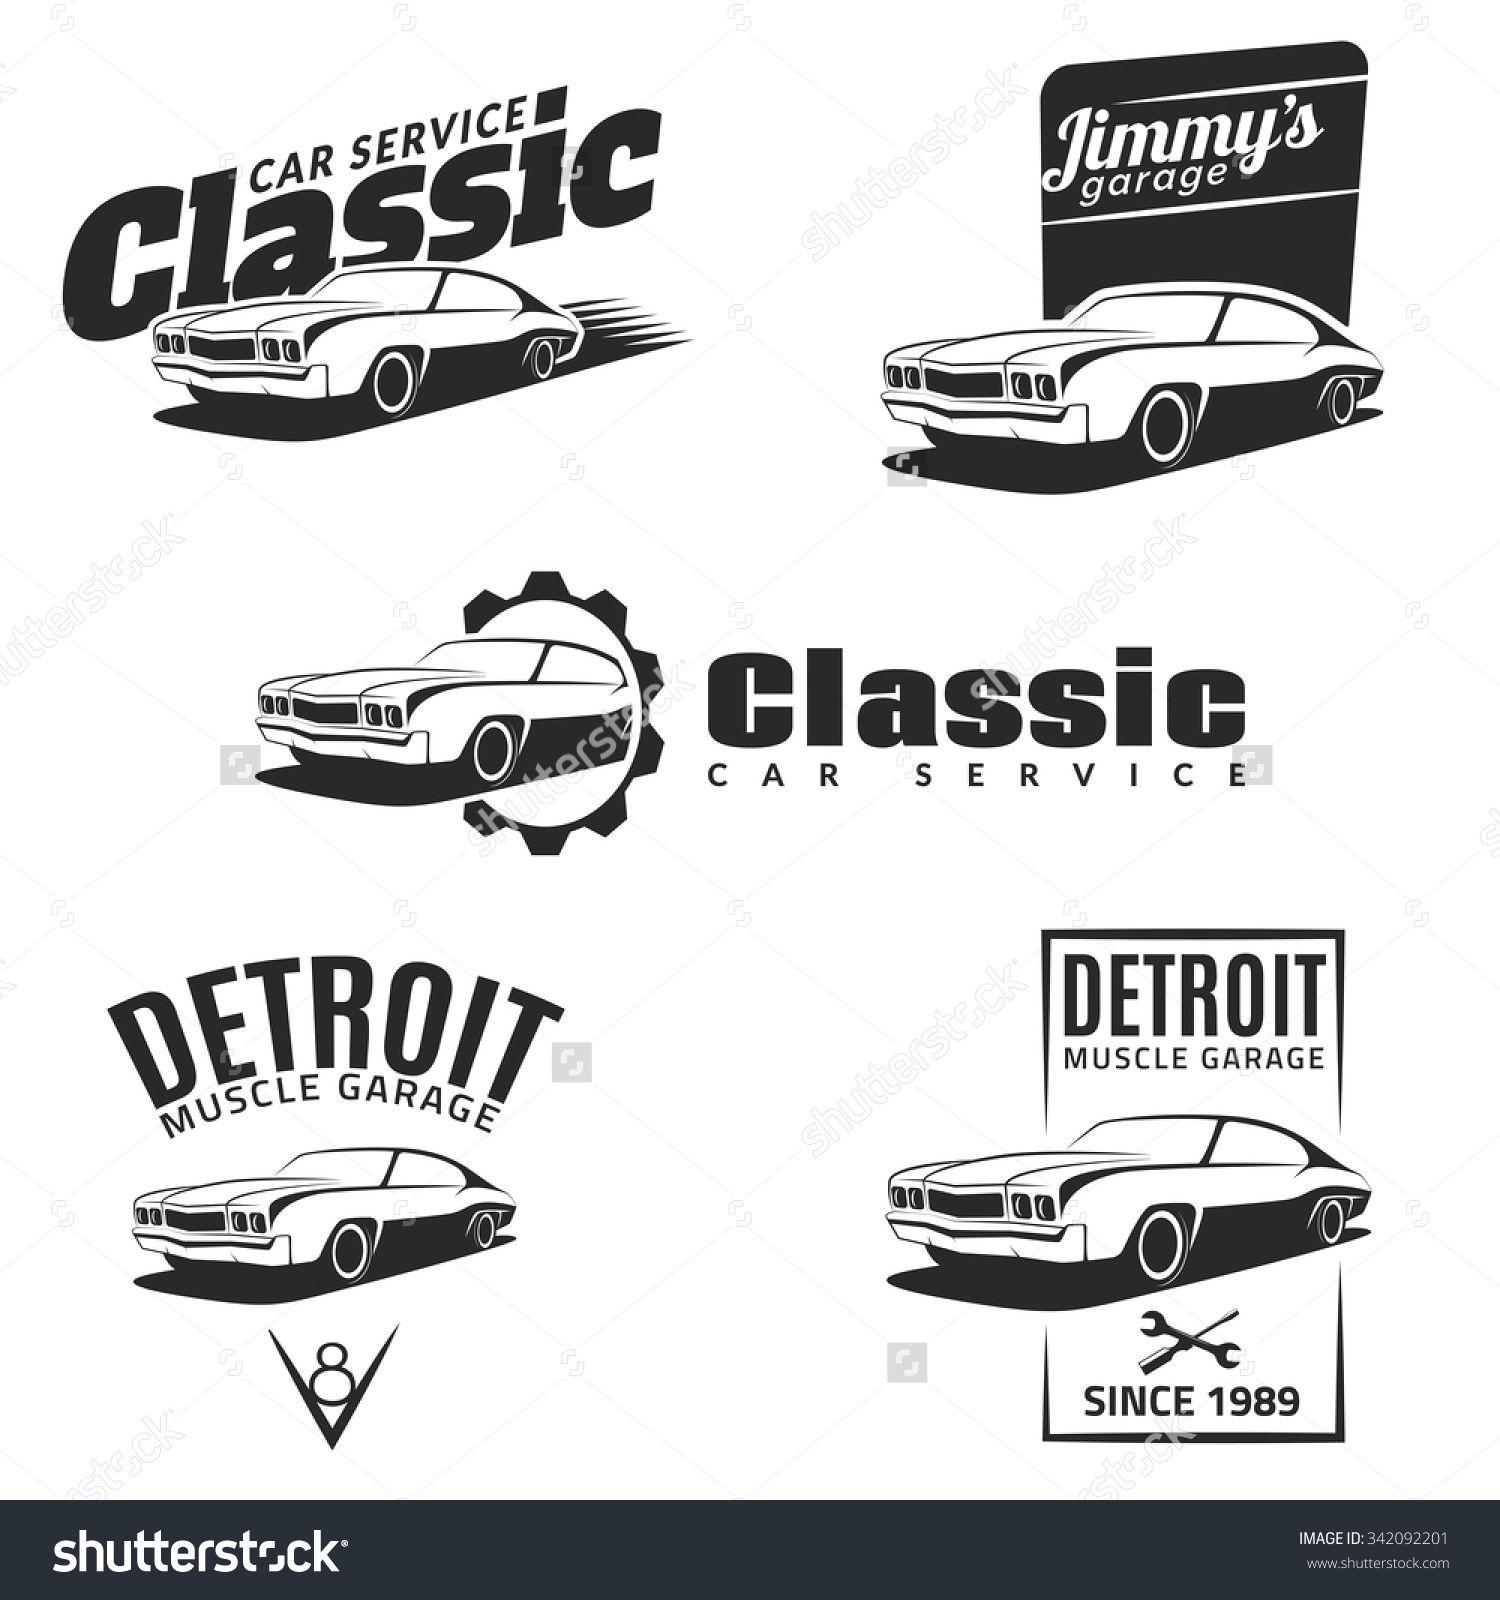 Classic Auto Repair Logo - Set of classic muscle car emblems, badges and icons. Service car